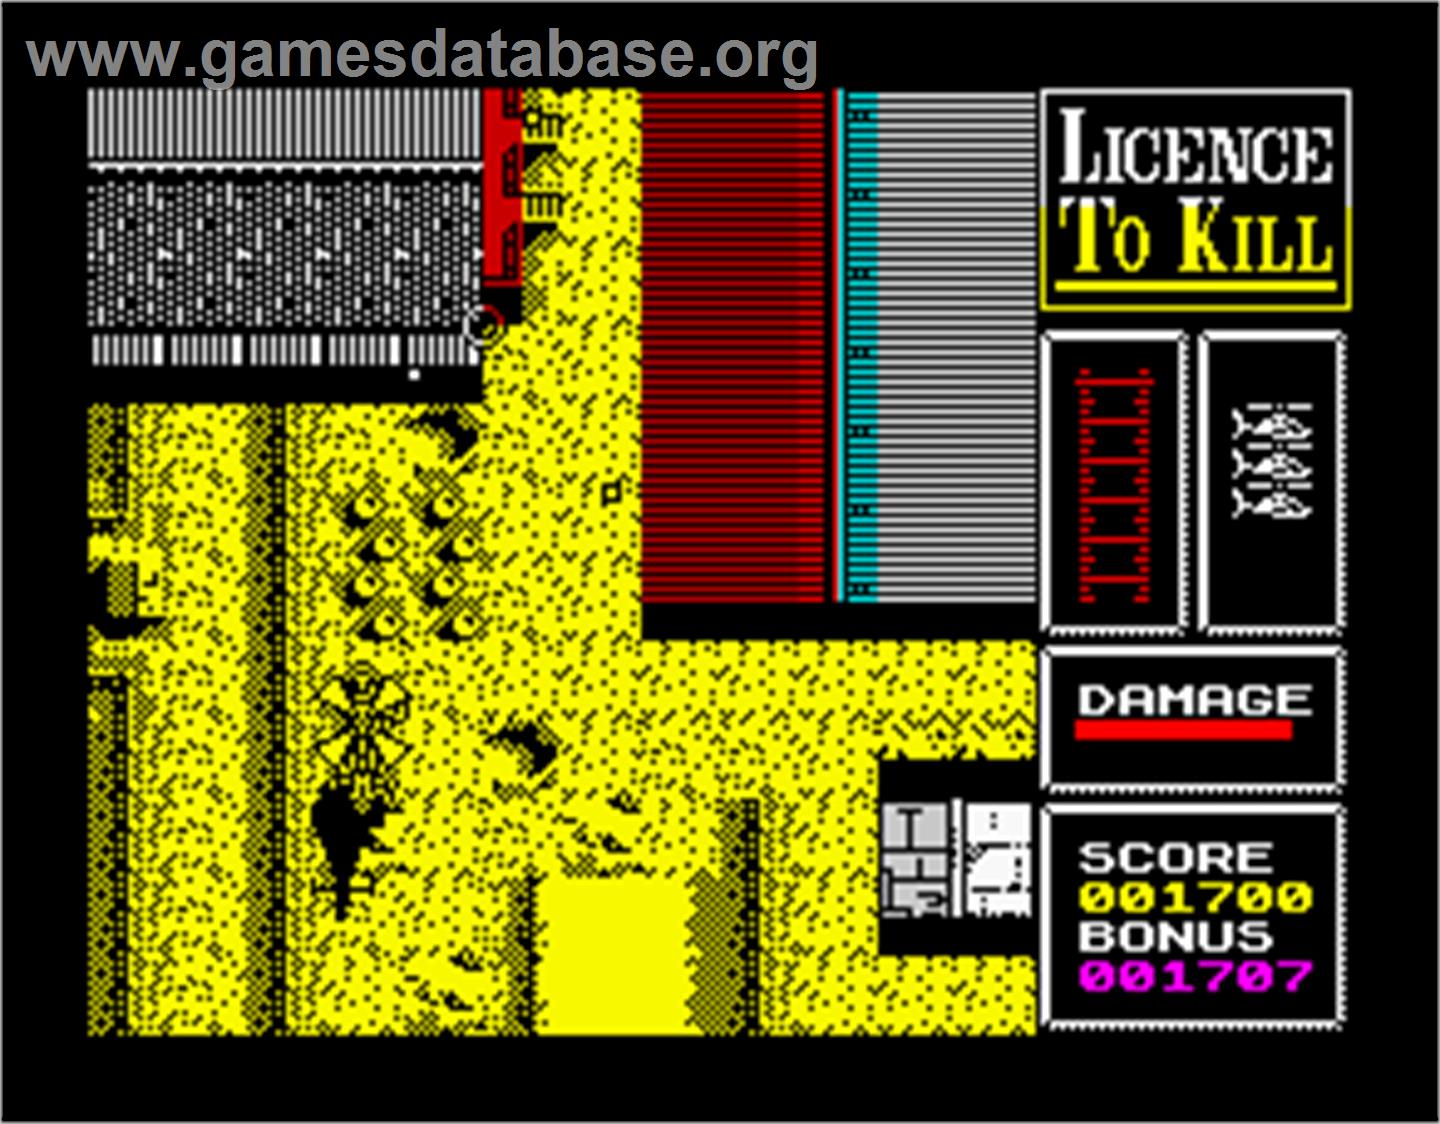 007: Licence to Kill - Sinclair ZX Spectrum - Artwork - In Game